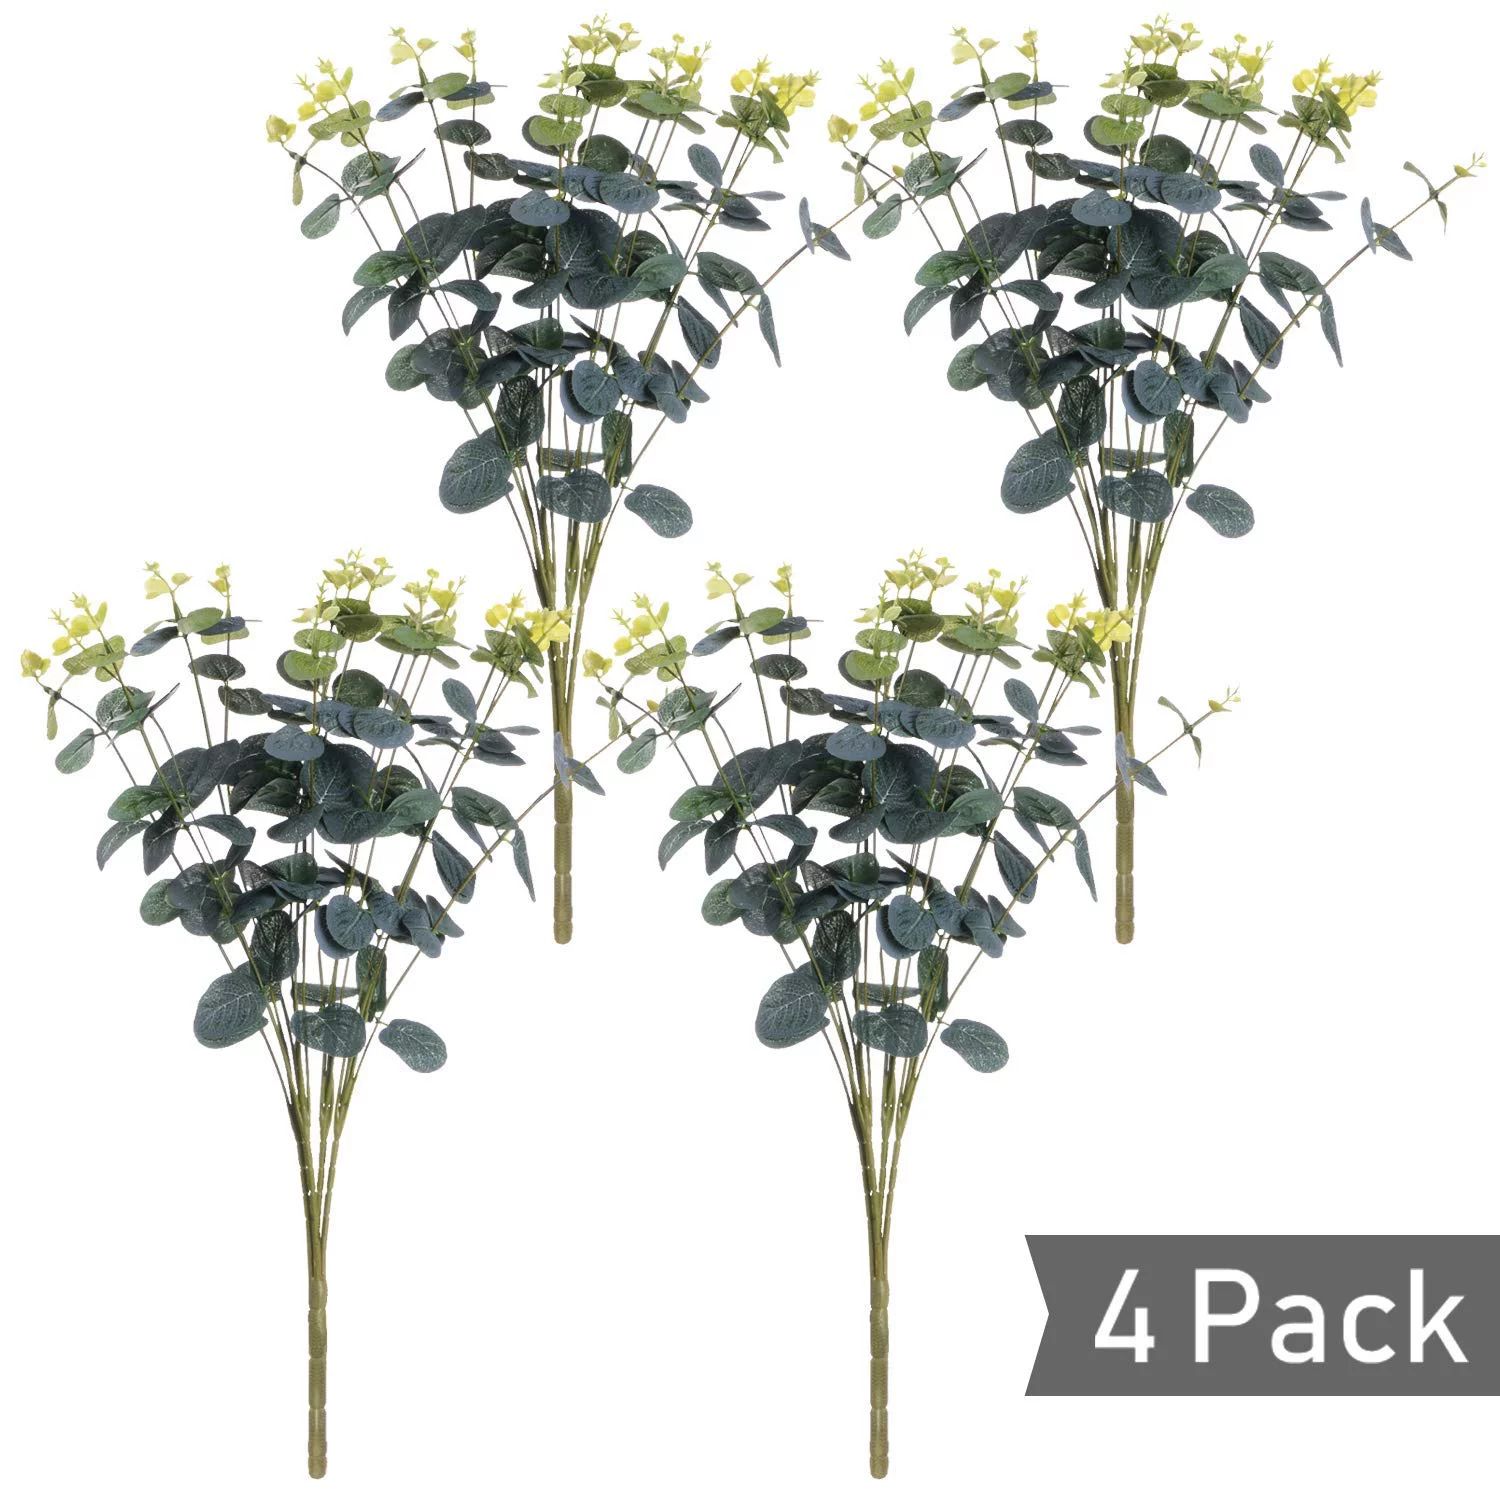 4 Pcs Artificial Silver Dollar Eucalyptus Leaf Branches, Fake Greenery Foliage Plants with Total ... | Walmart (US)